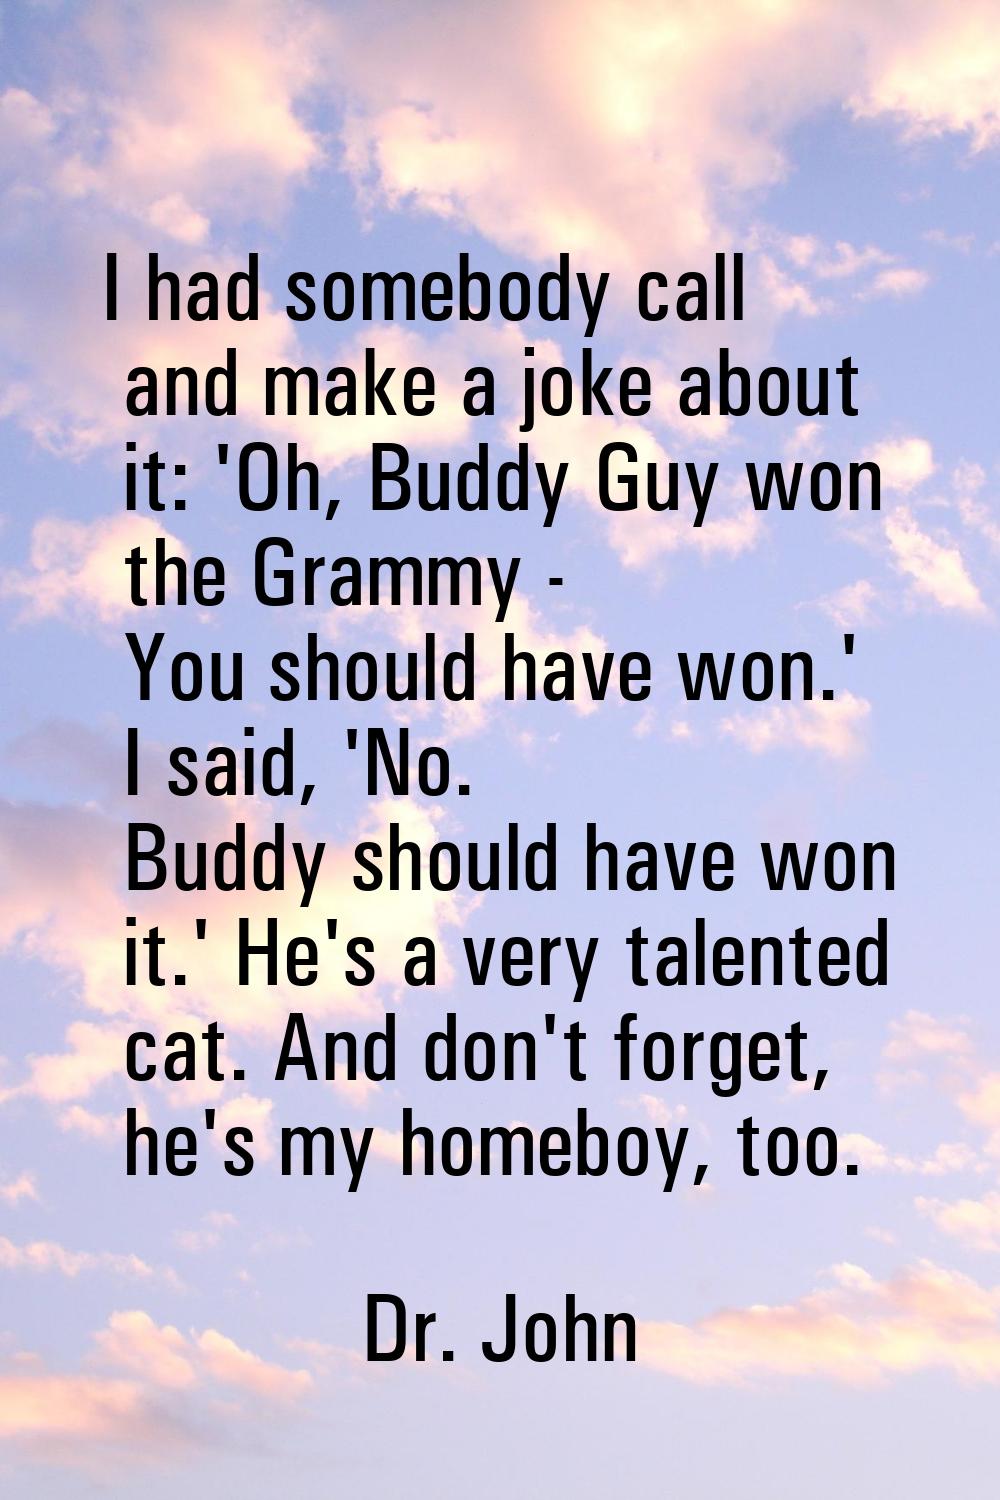 I had somebody call and make a joke about it: 'Oh, Buddy Guy won the Grammy - You should have won.'